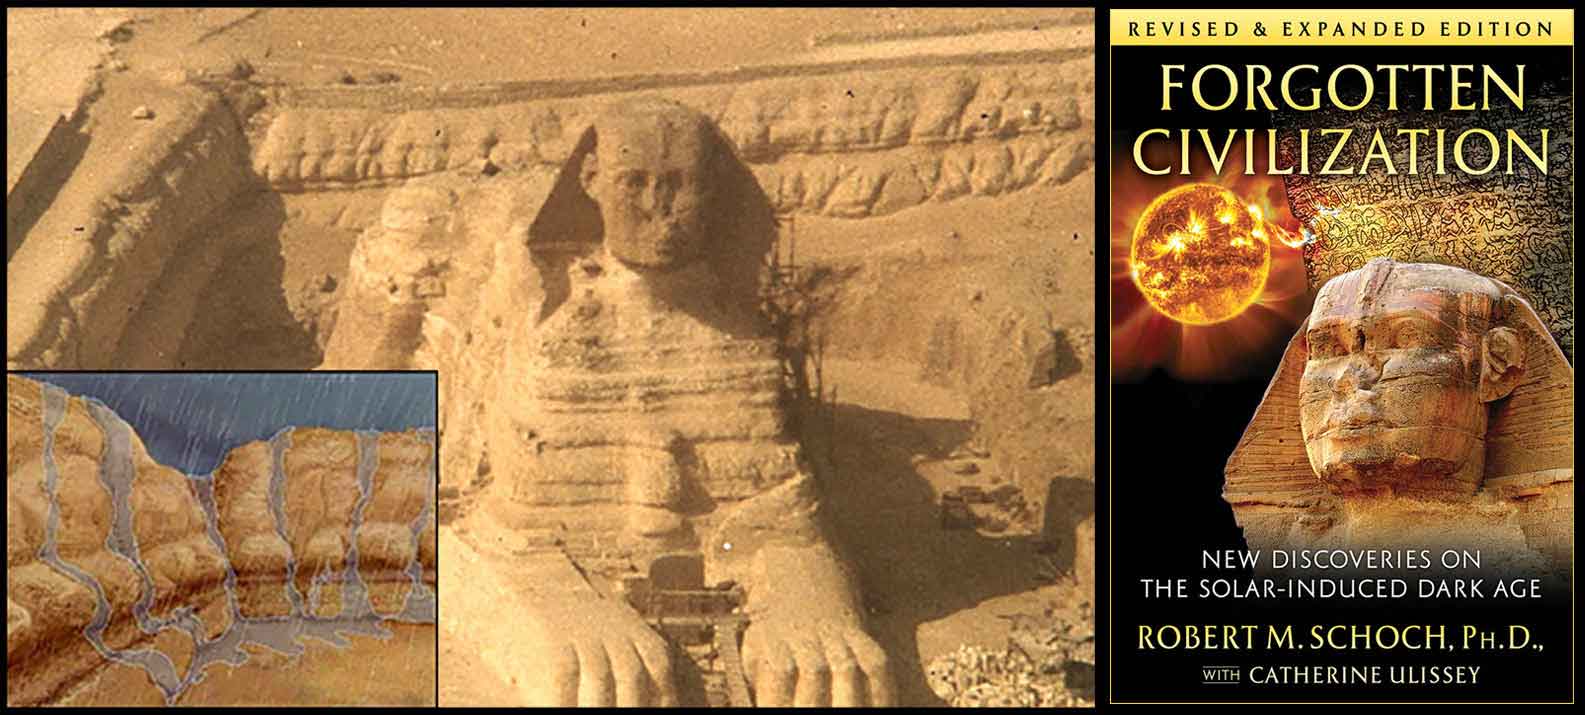 A combined image of the Great Sphinx and cover of Dr. Schoch's book, Forgotten Civilization